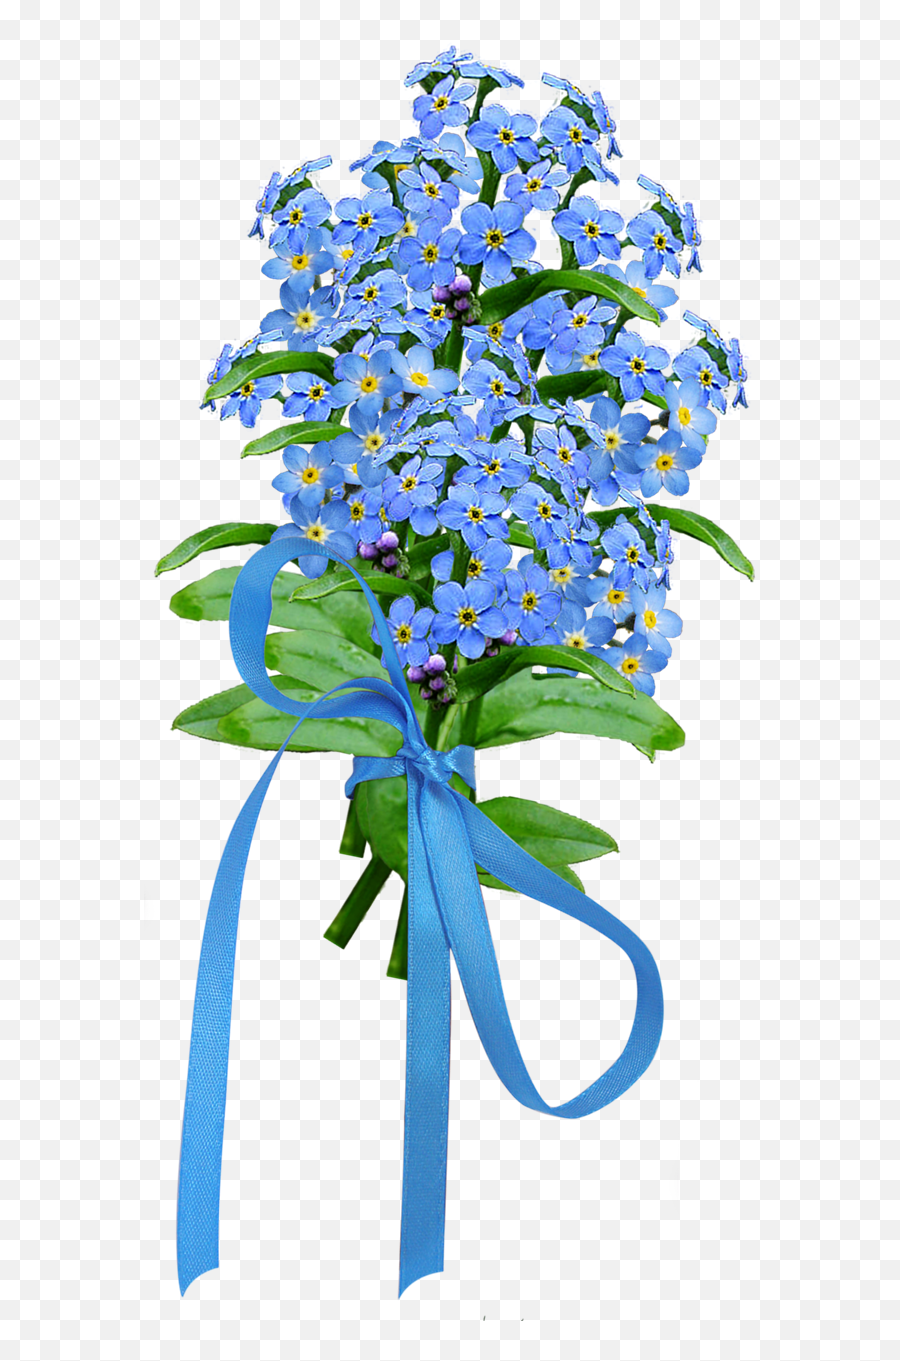 Forget Me Not Png Image - Forget Me Nots Blue Flowers Transparent Background Emoji,Forget Me Not Flowers Clipart